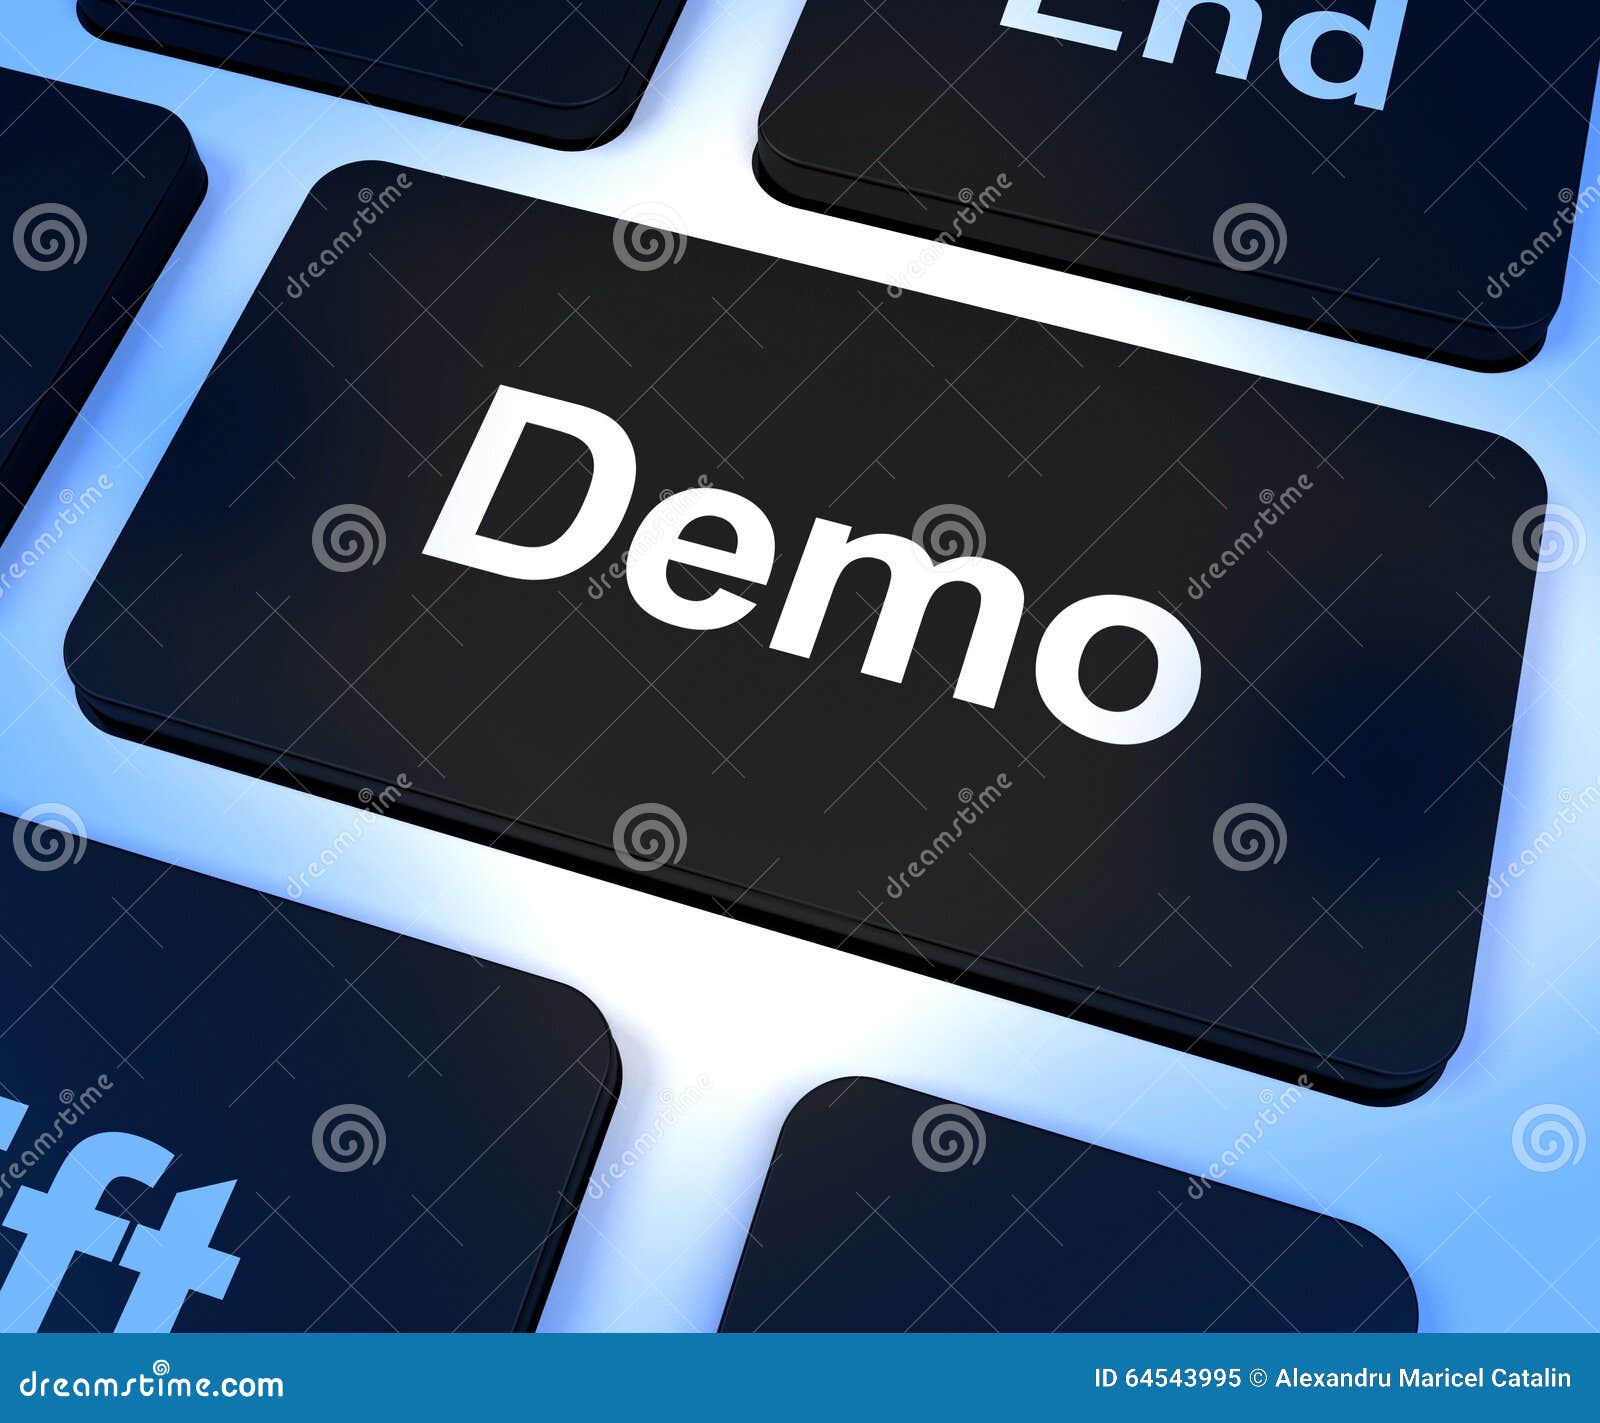 demo computer key to download a version of software